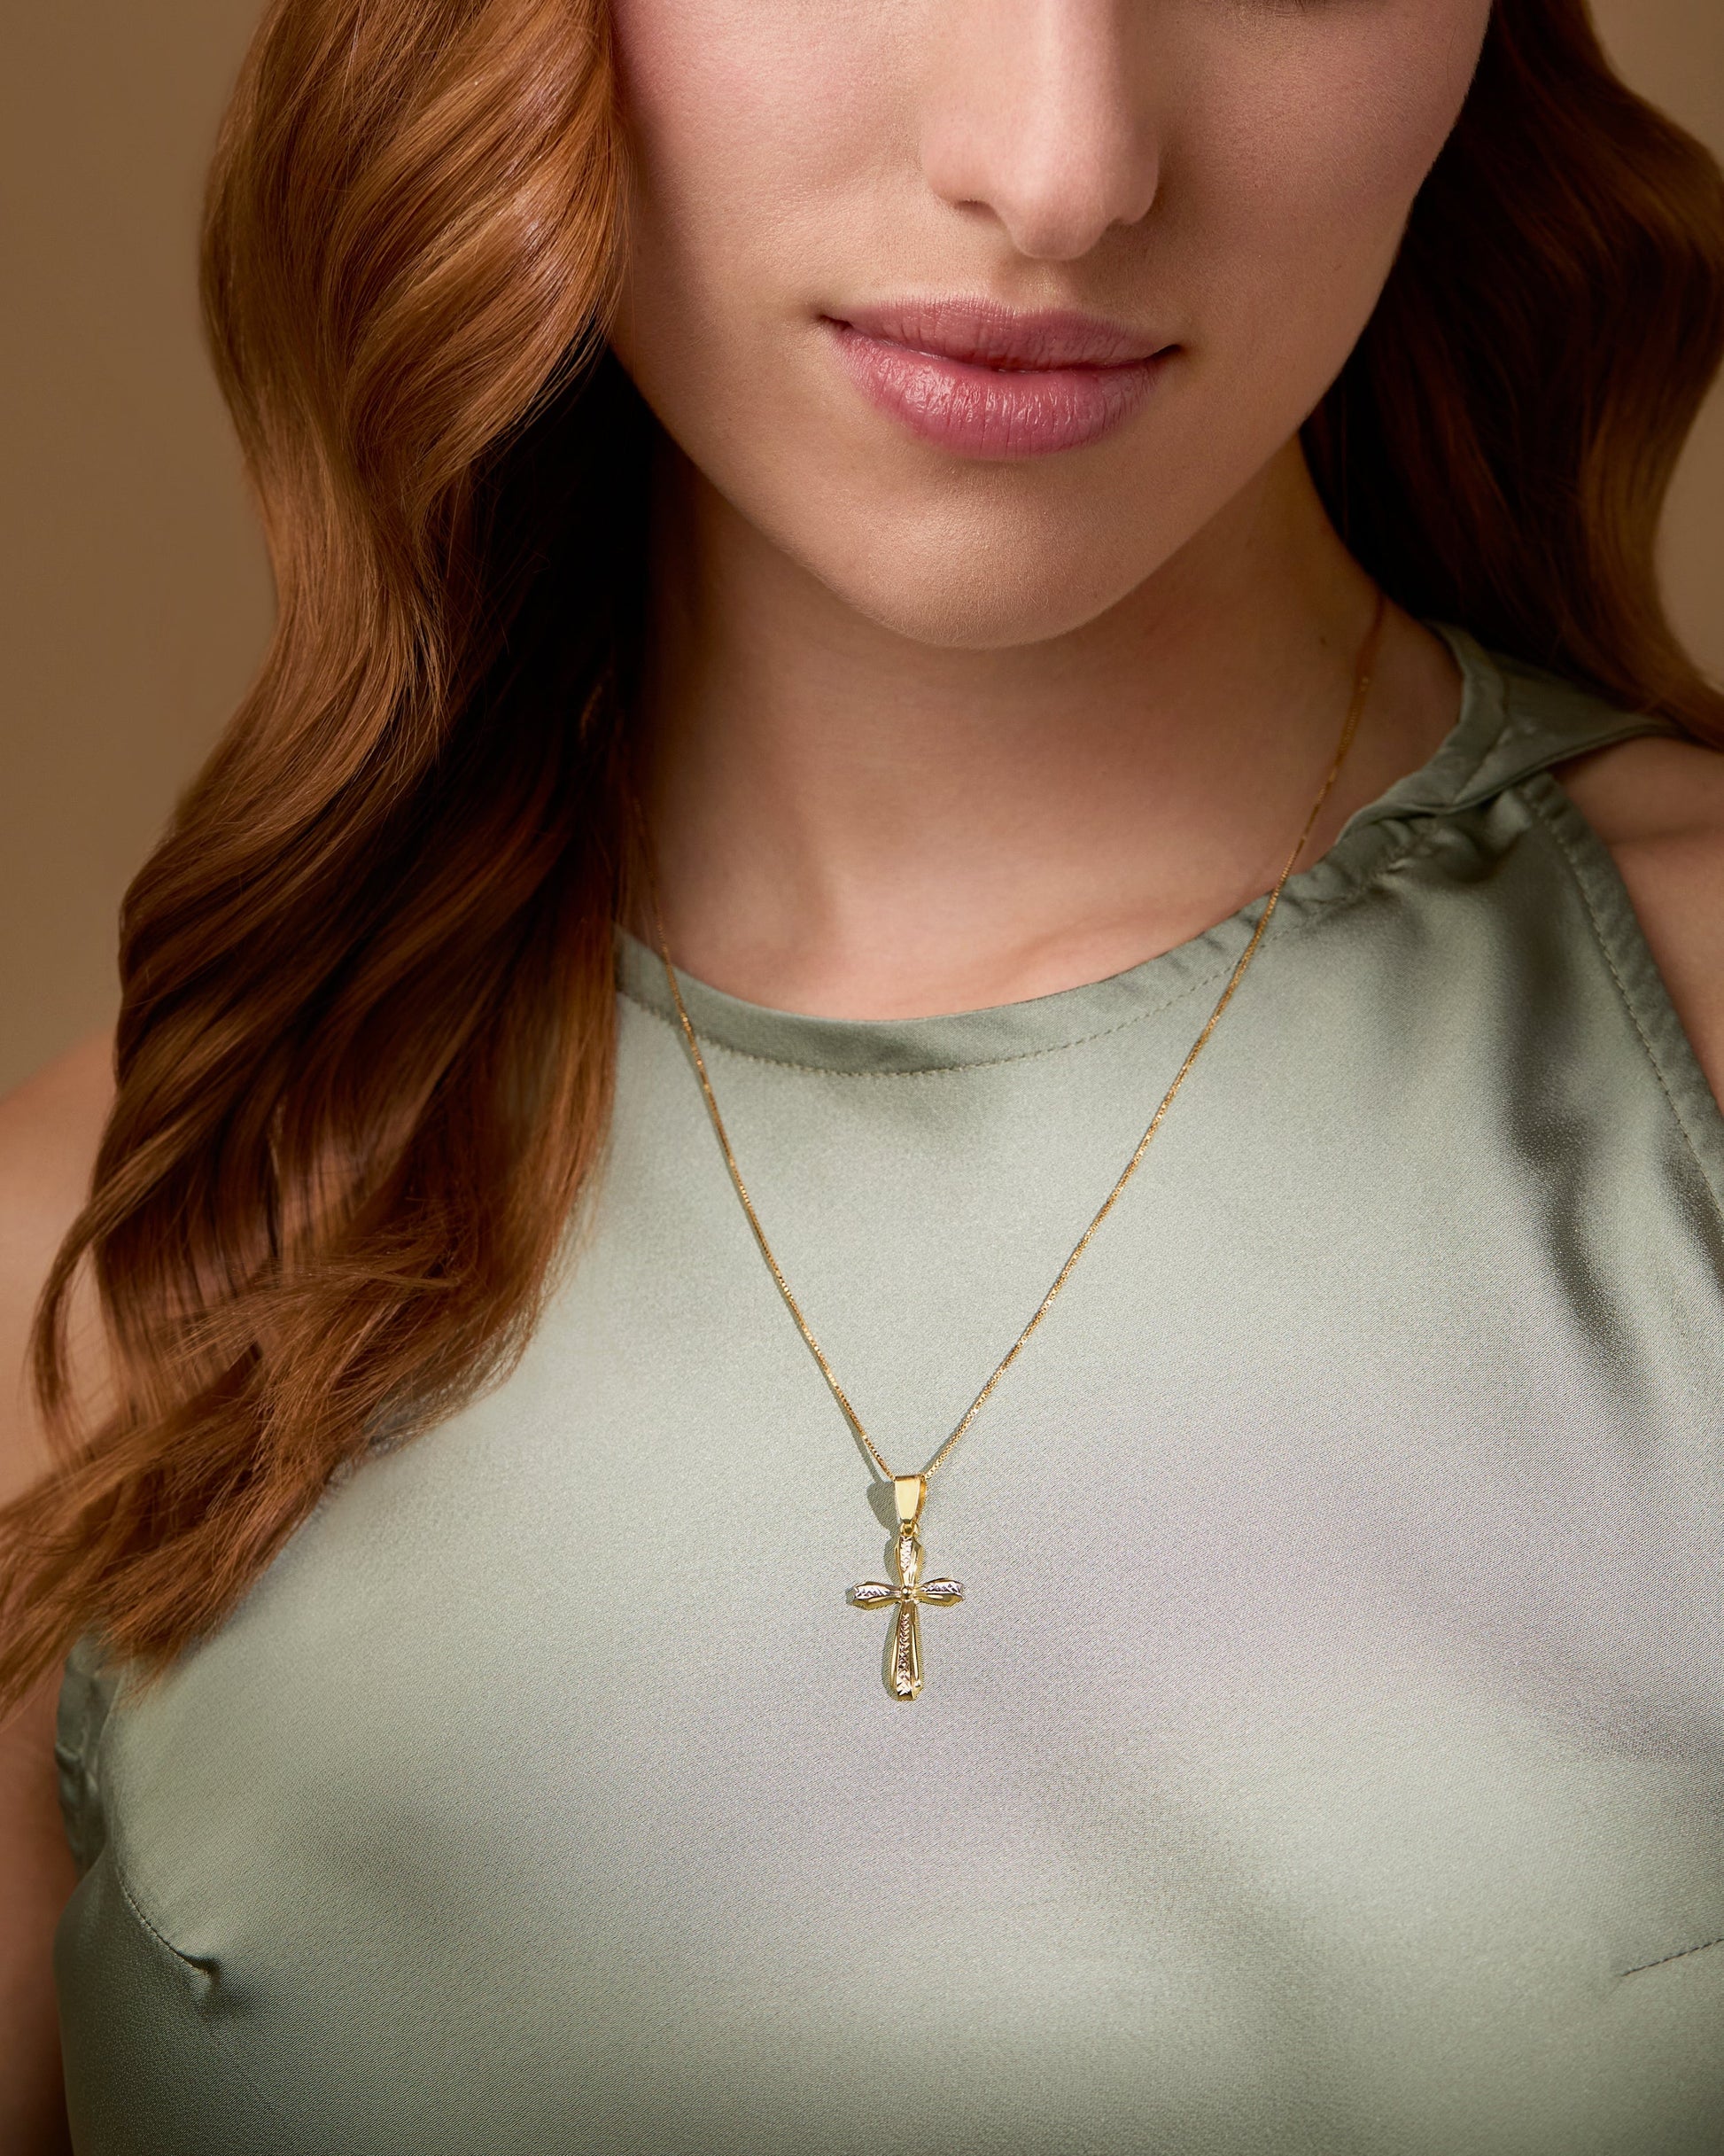 Mondo Cattolico Pendant 27 mm (1.06 in) Yellow Gold Flower Cross Pendant With White Gold and Rose Gold Diamond-cut Details